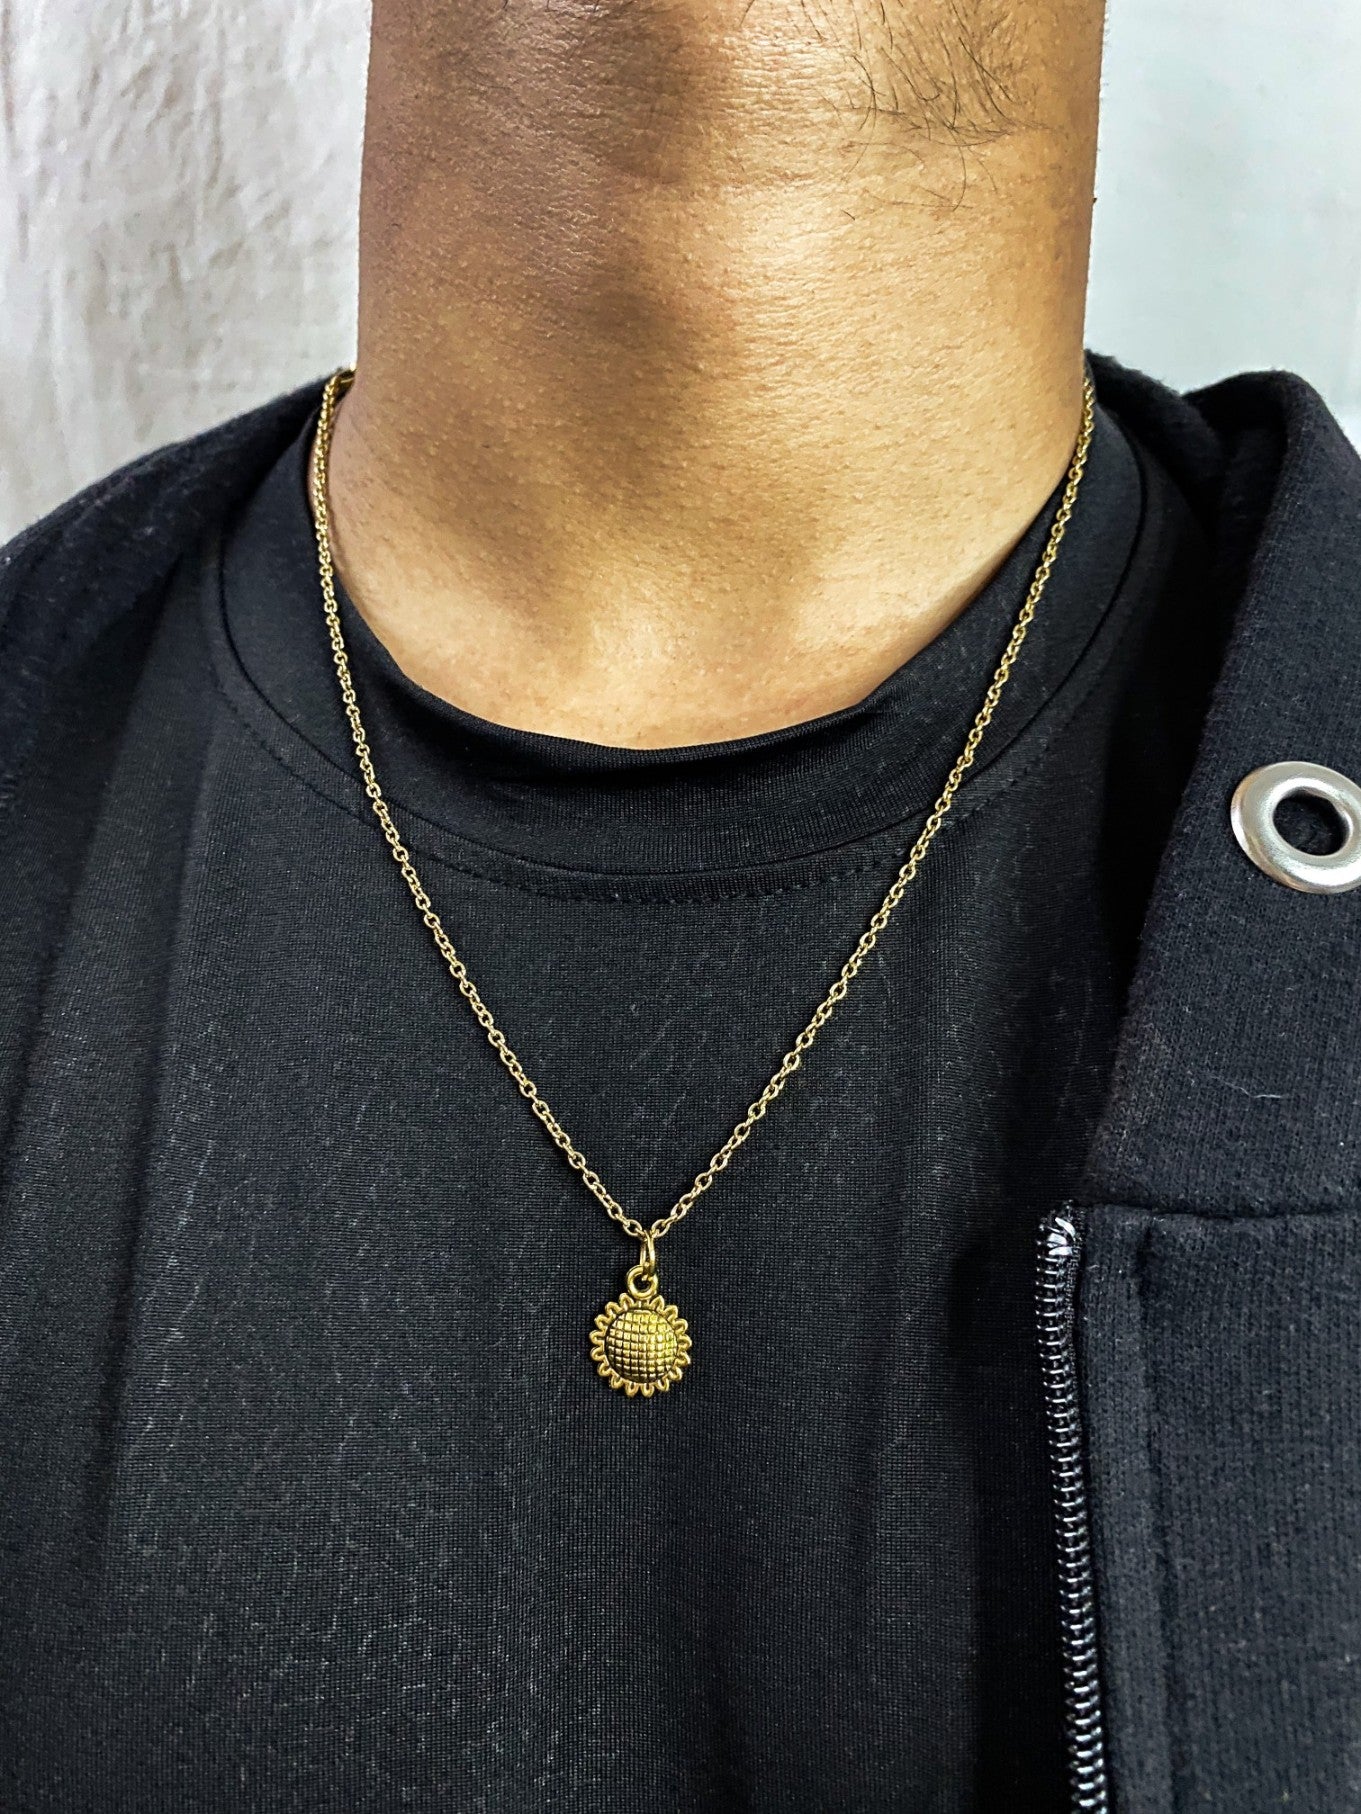 Golden Sunflower Pendant With Chain